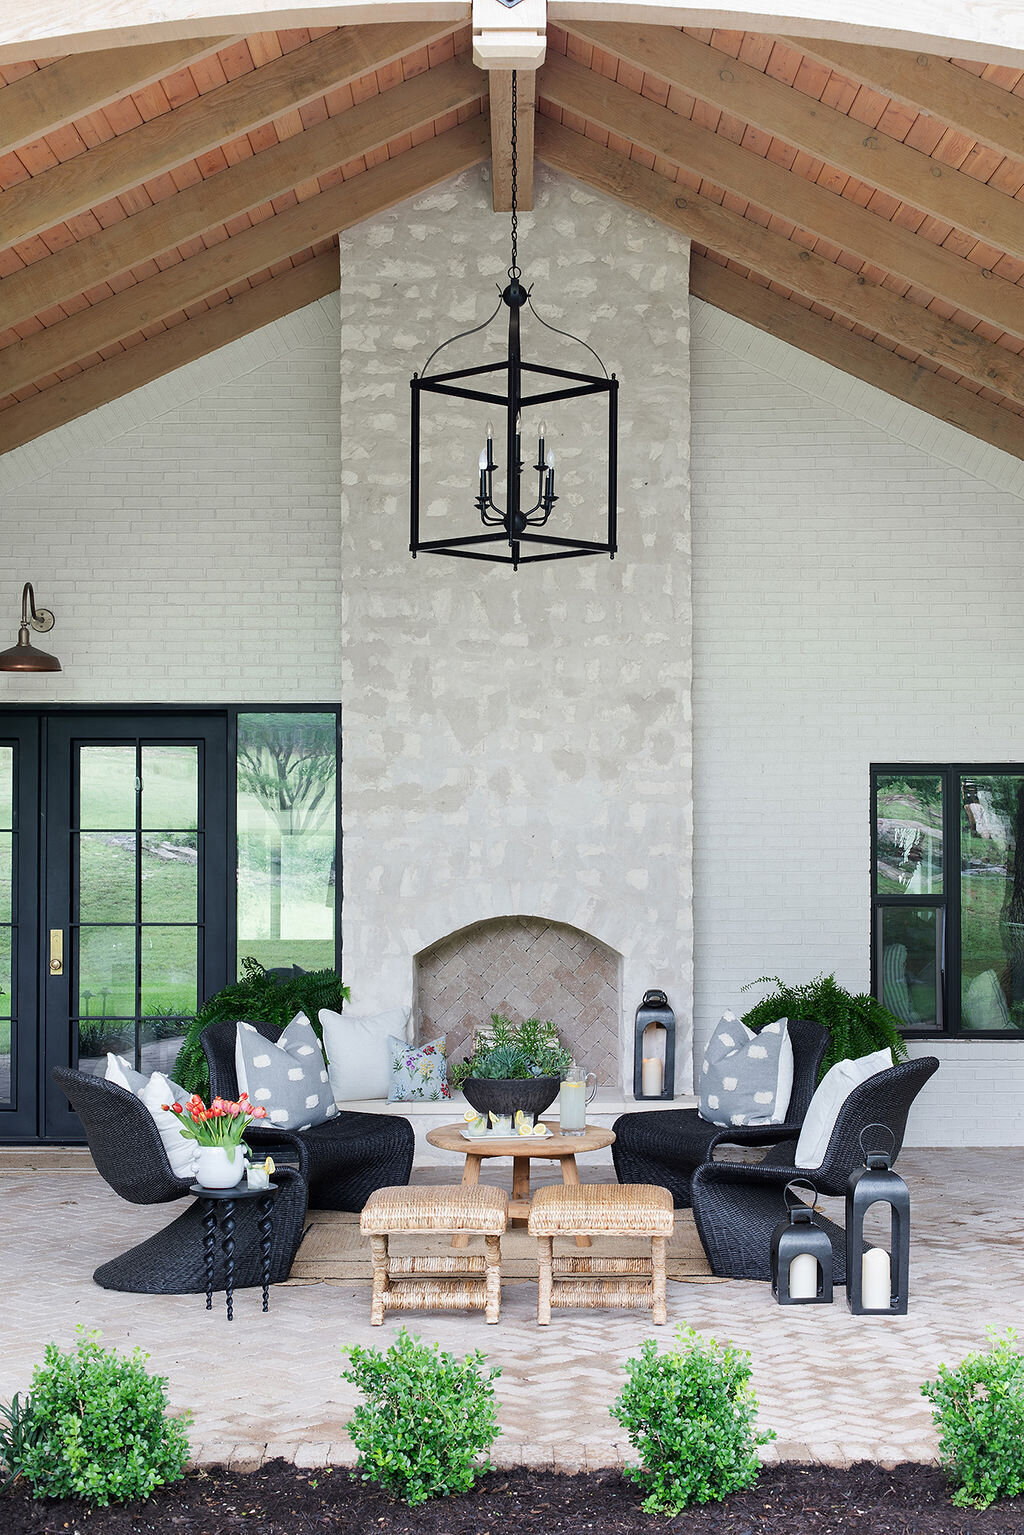 large outdoor seating area with fireplace and chandelier